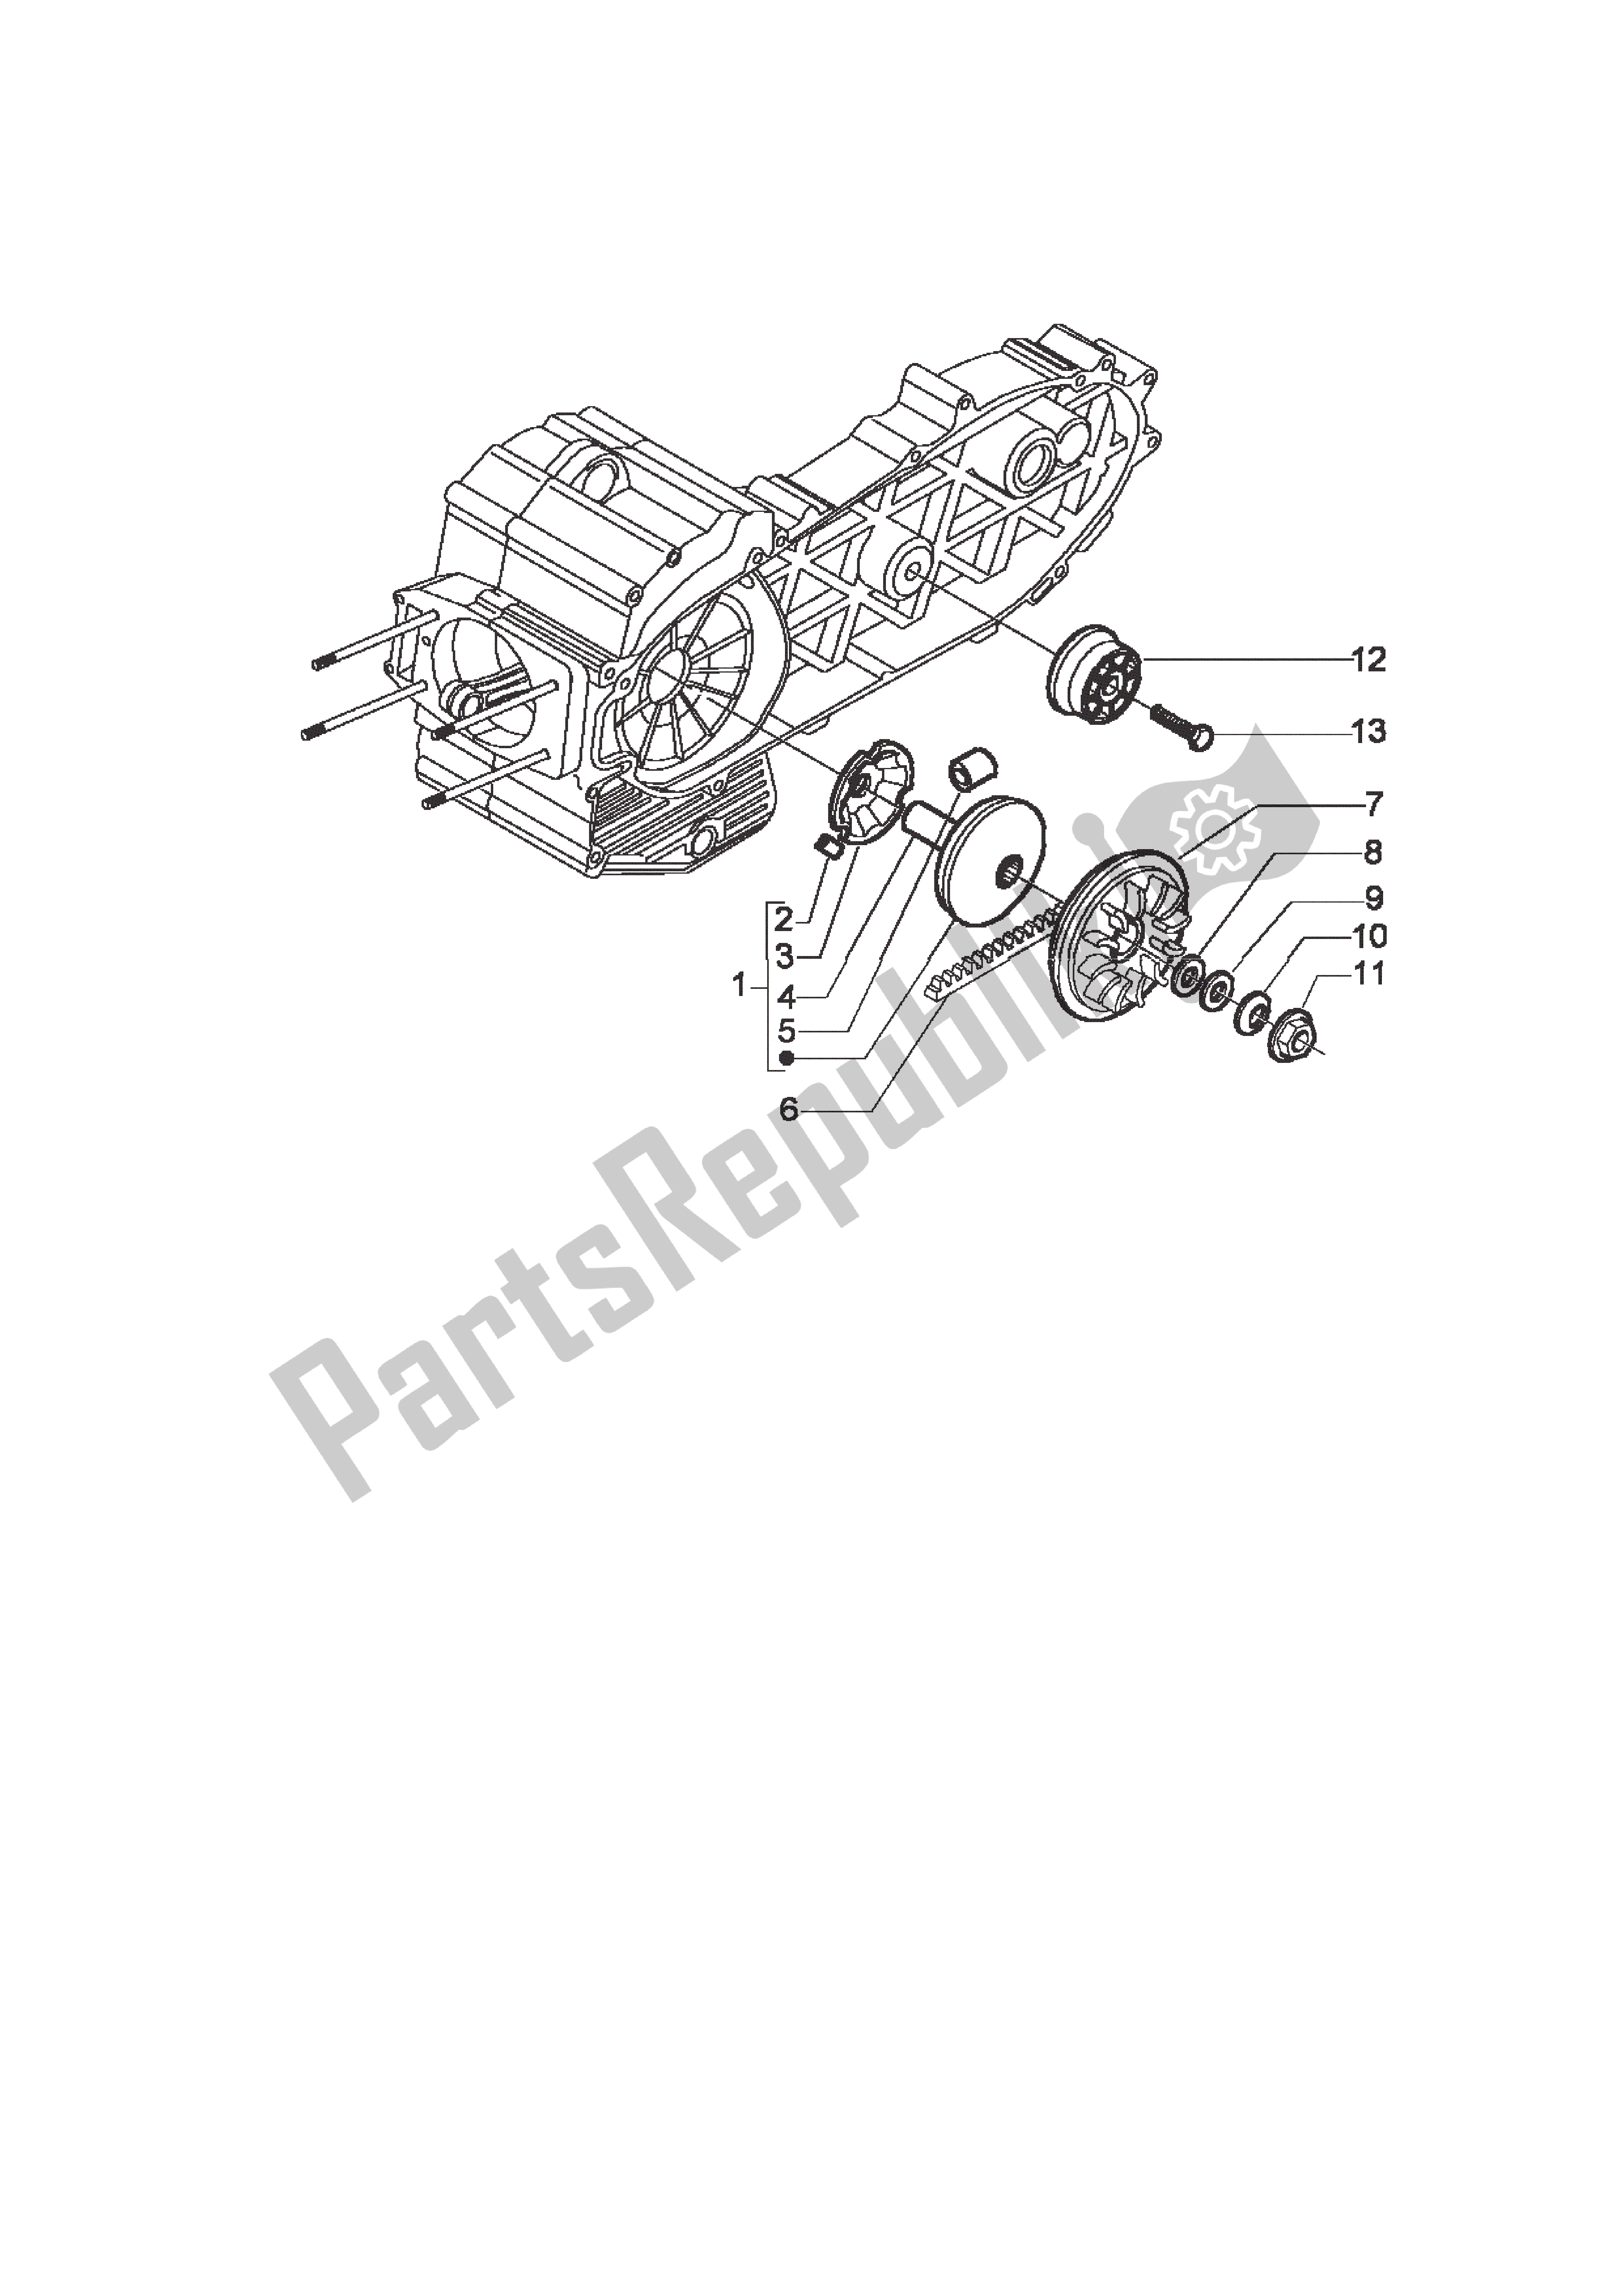 All parts for the Driving Pulley of the Piaggio X9 500 2003 - 2004